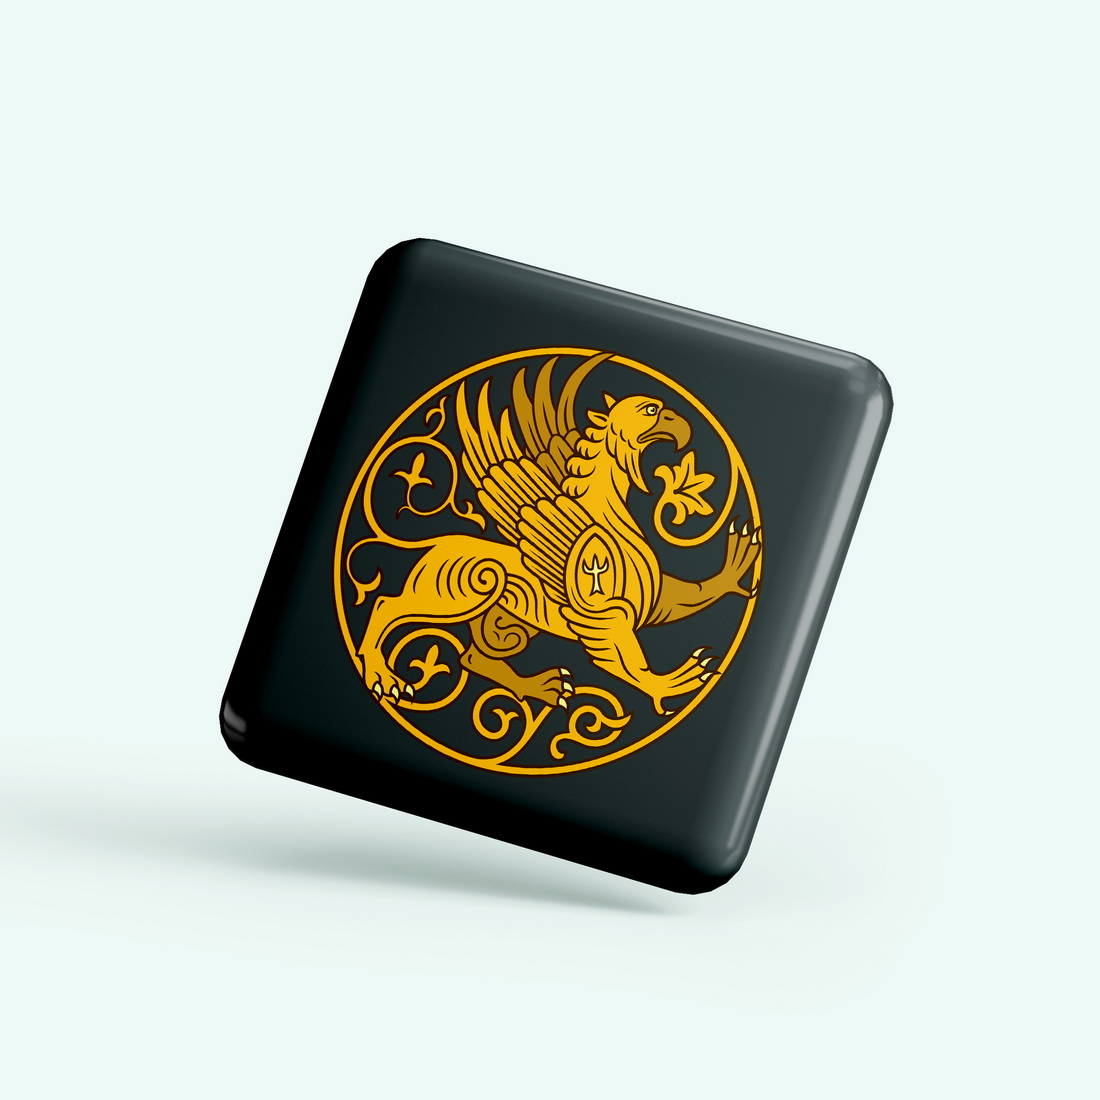 Black square button with a gold design on it.